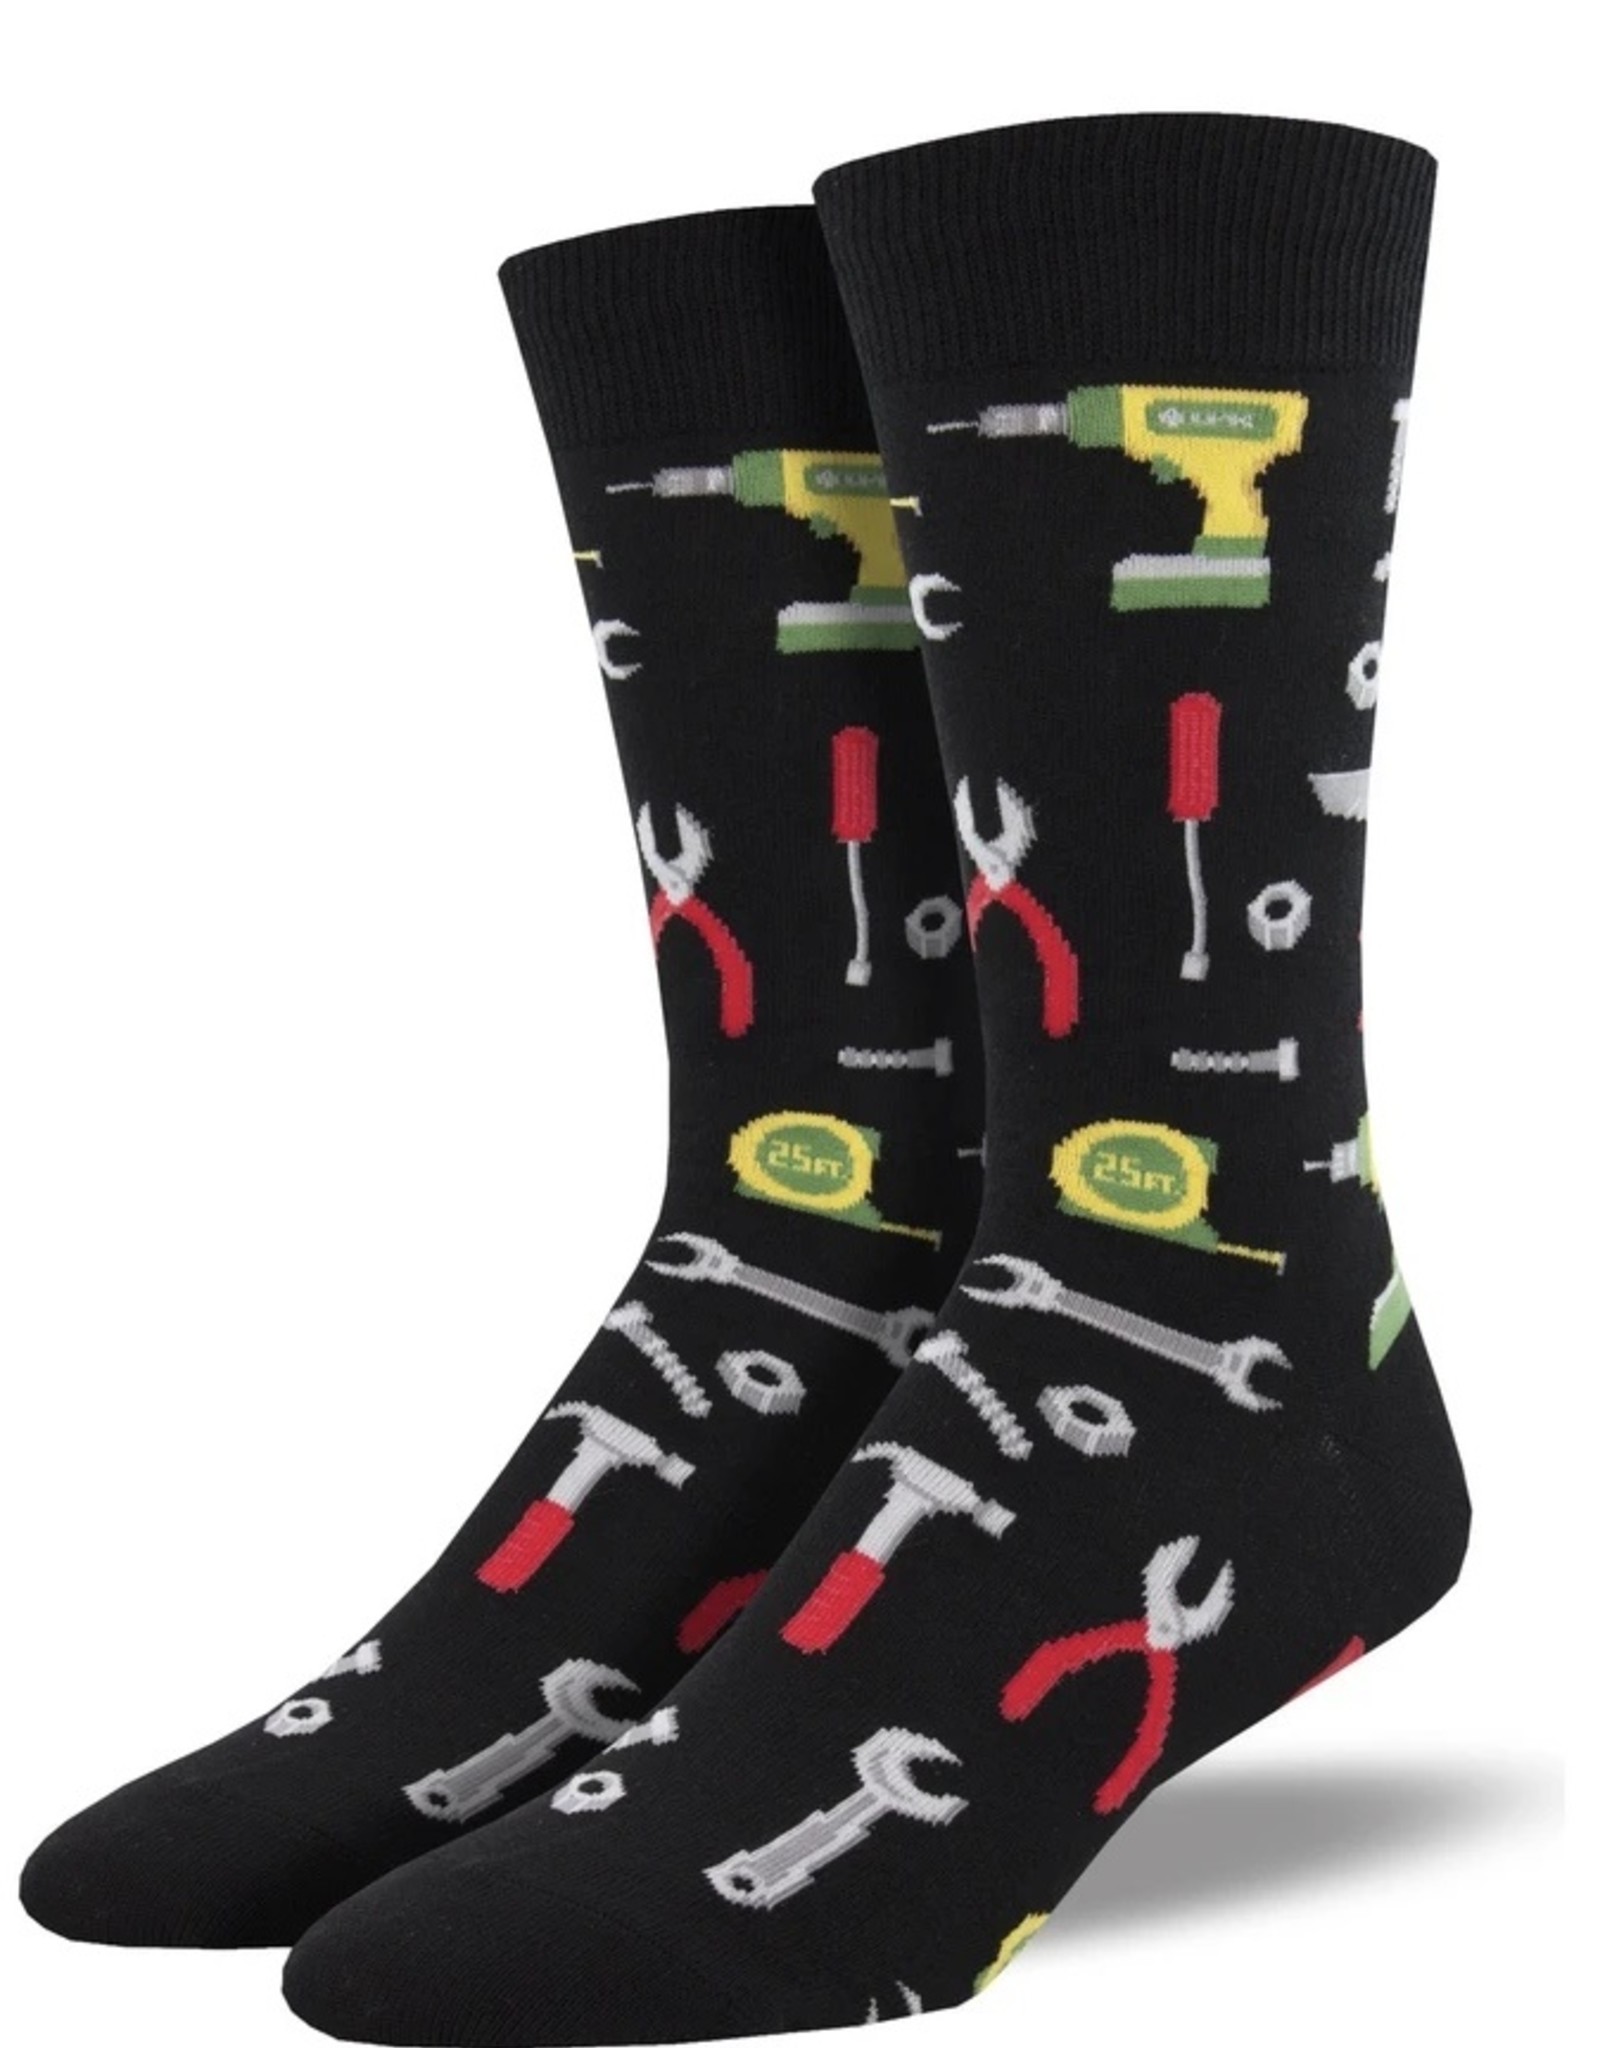 Socksmith Socksmith Canada Graphic Cotton Crew Sock - one size fits most - men